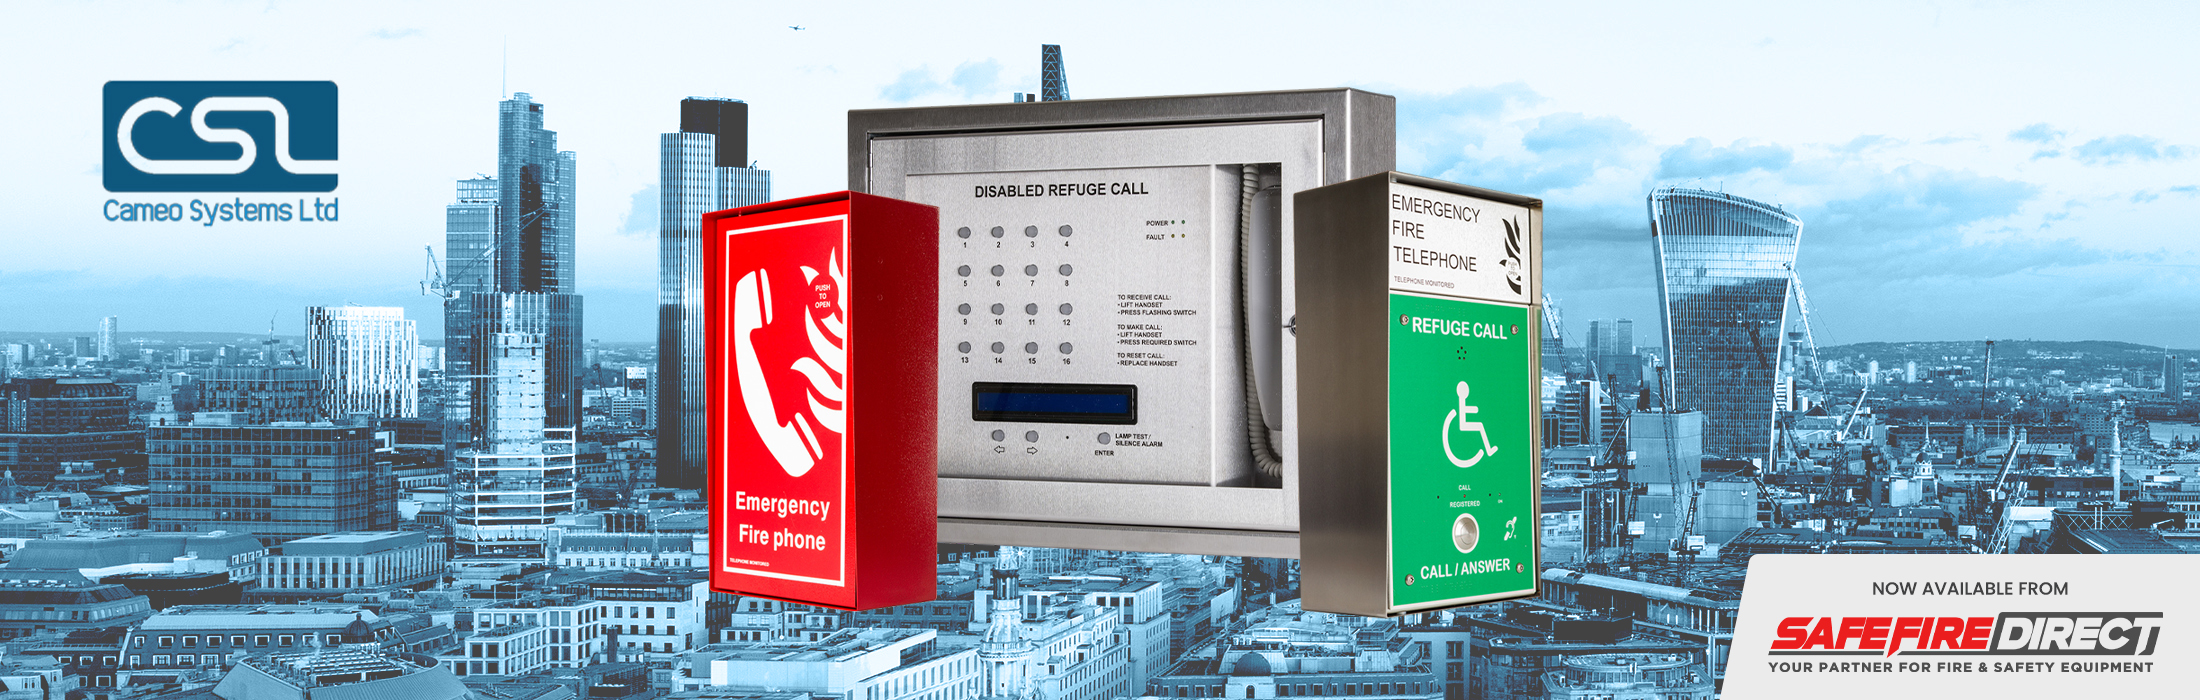 Cameo Systems range of EVC and Fire Telephone products now available from Safe Fire Direct